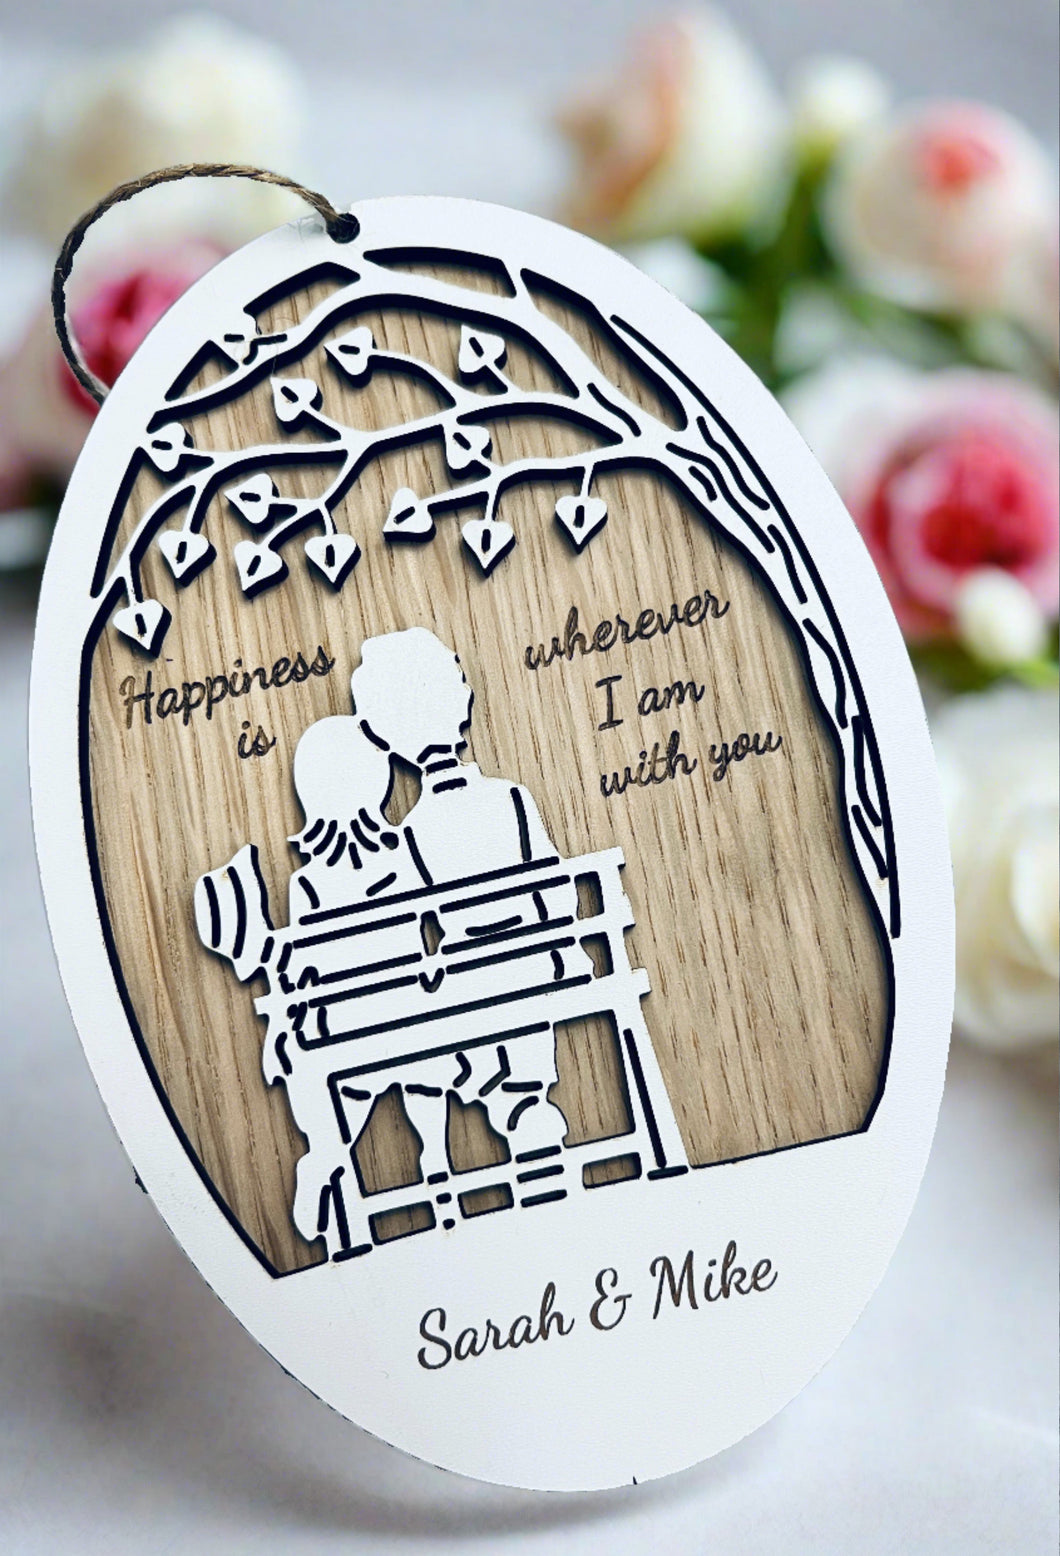 Wooden personalised happiness couple plaque - Laser LLama Designs Ltd